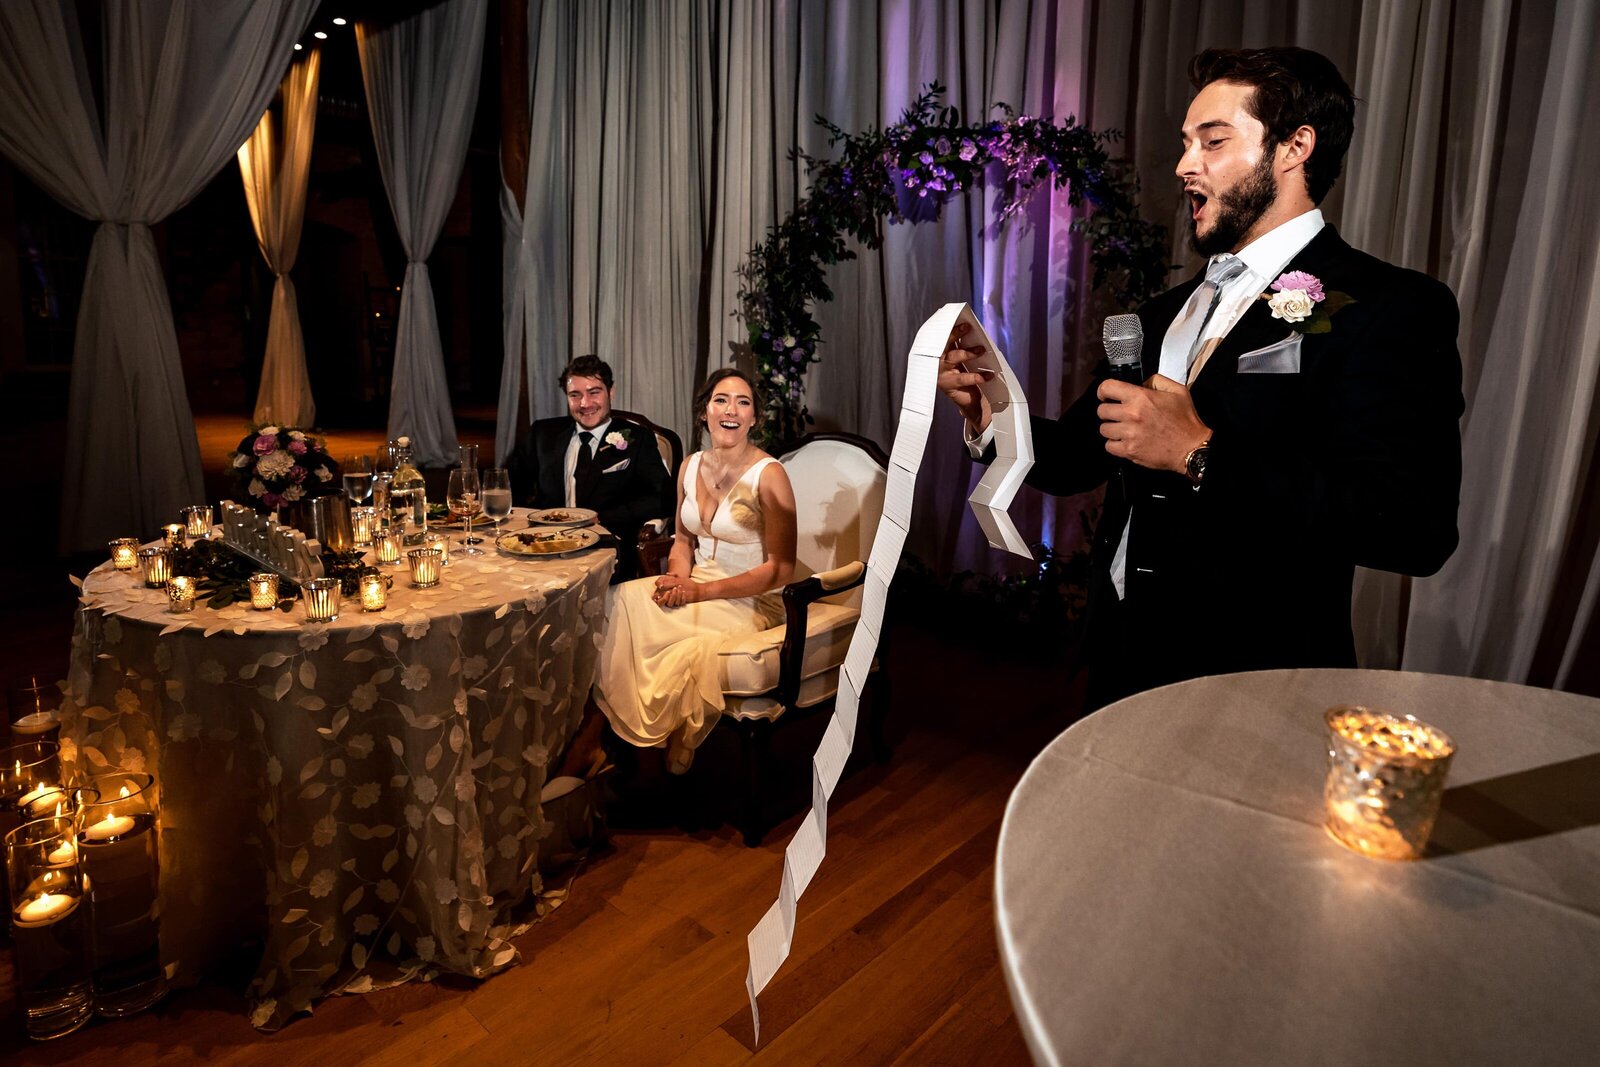 wedding couple sitting at their sweetheart table laughs as a groomsman makes a toast in the foreground